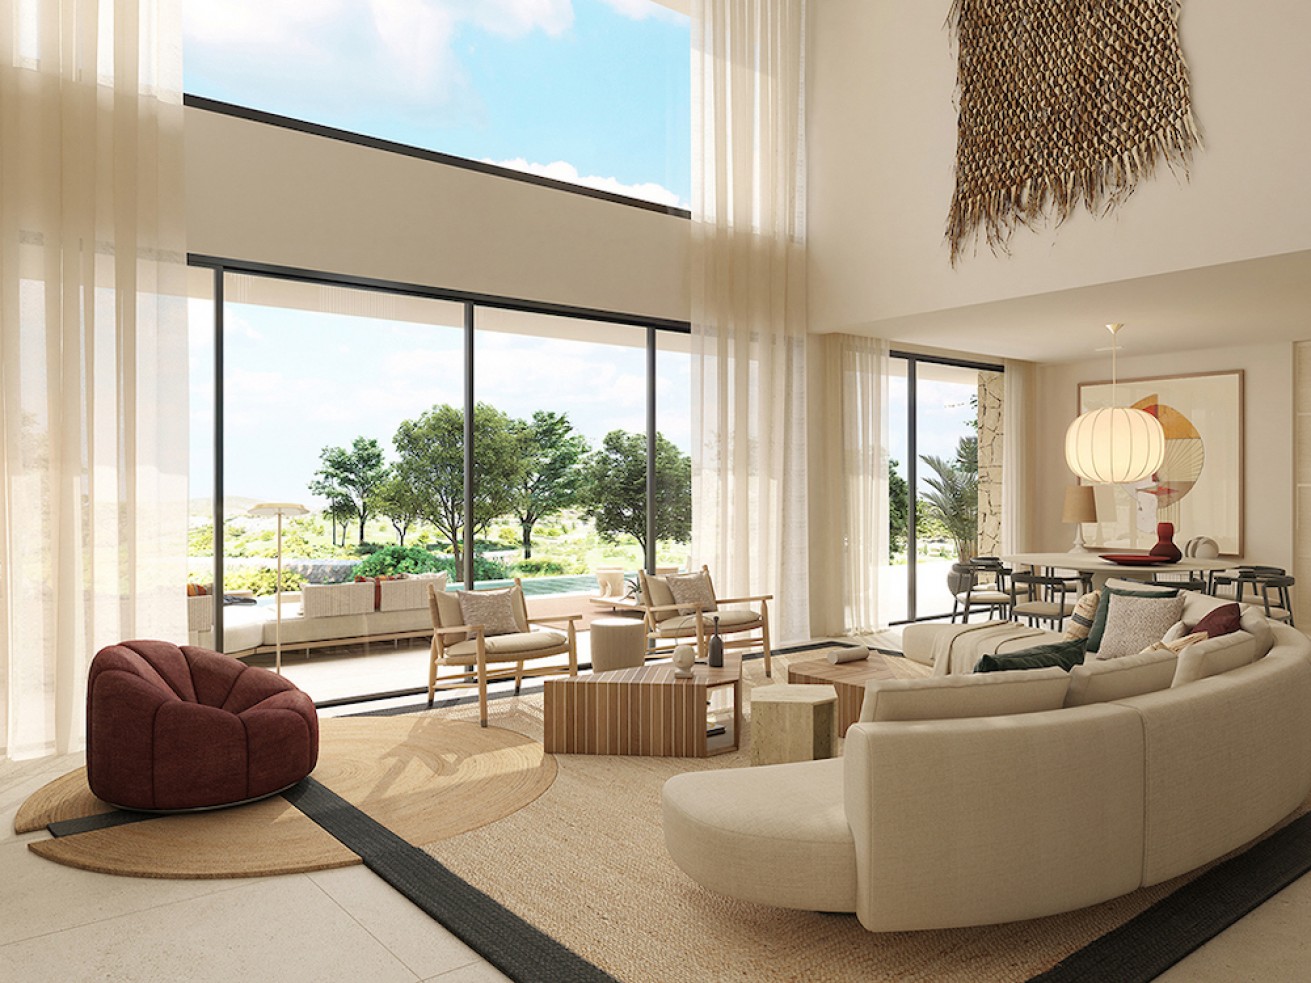 New project: get a sneak peek at the Corallisa Signature Homes Ibiza show home